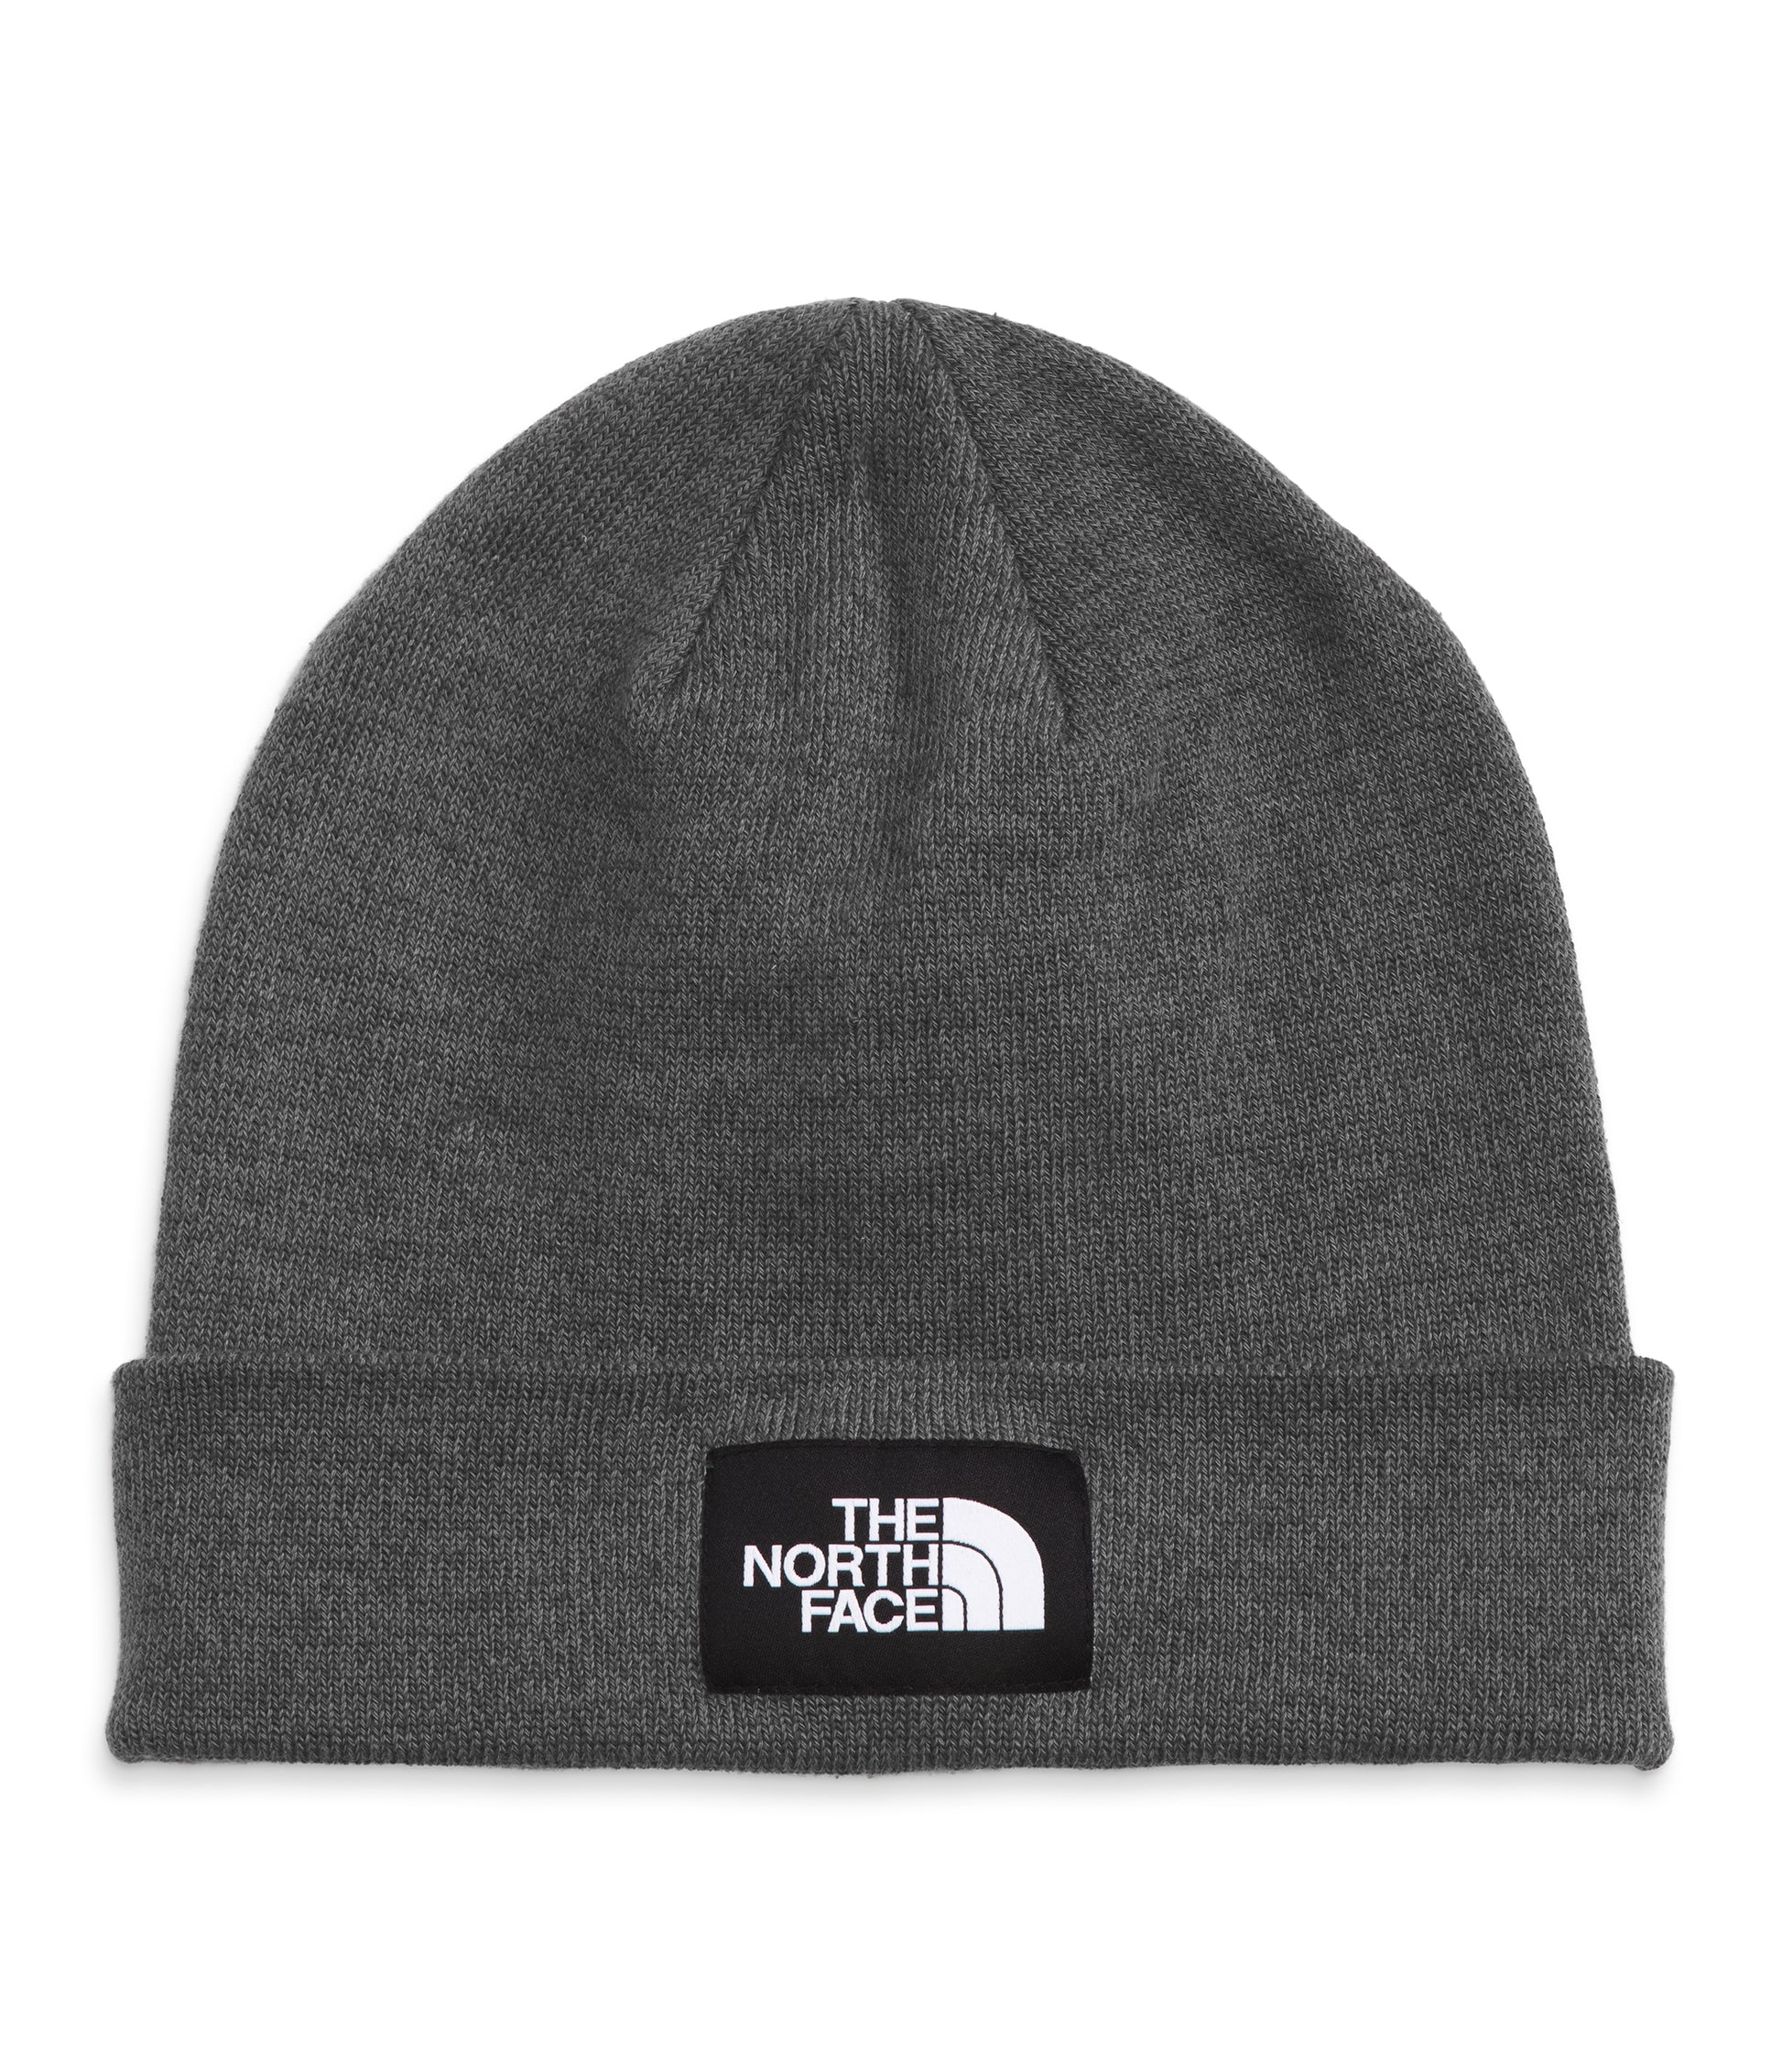 Gorro Dock Worker Recycled The North Face Gris